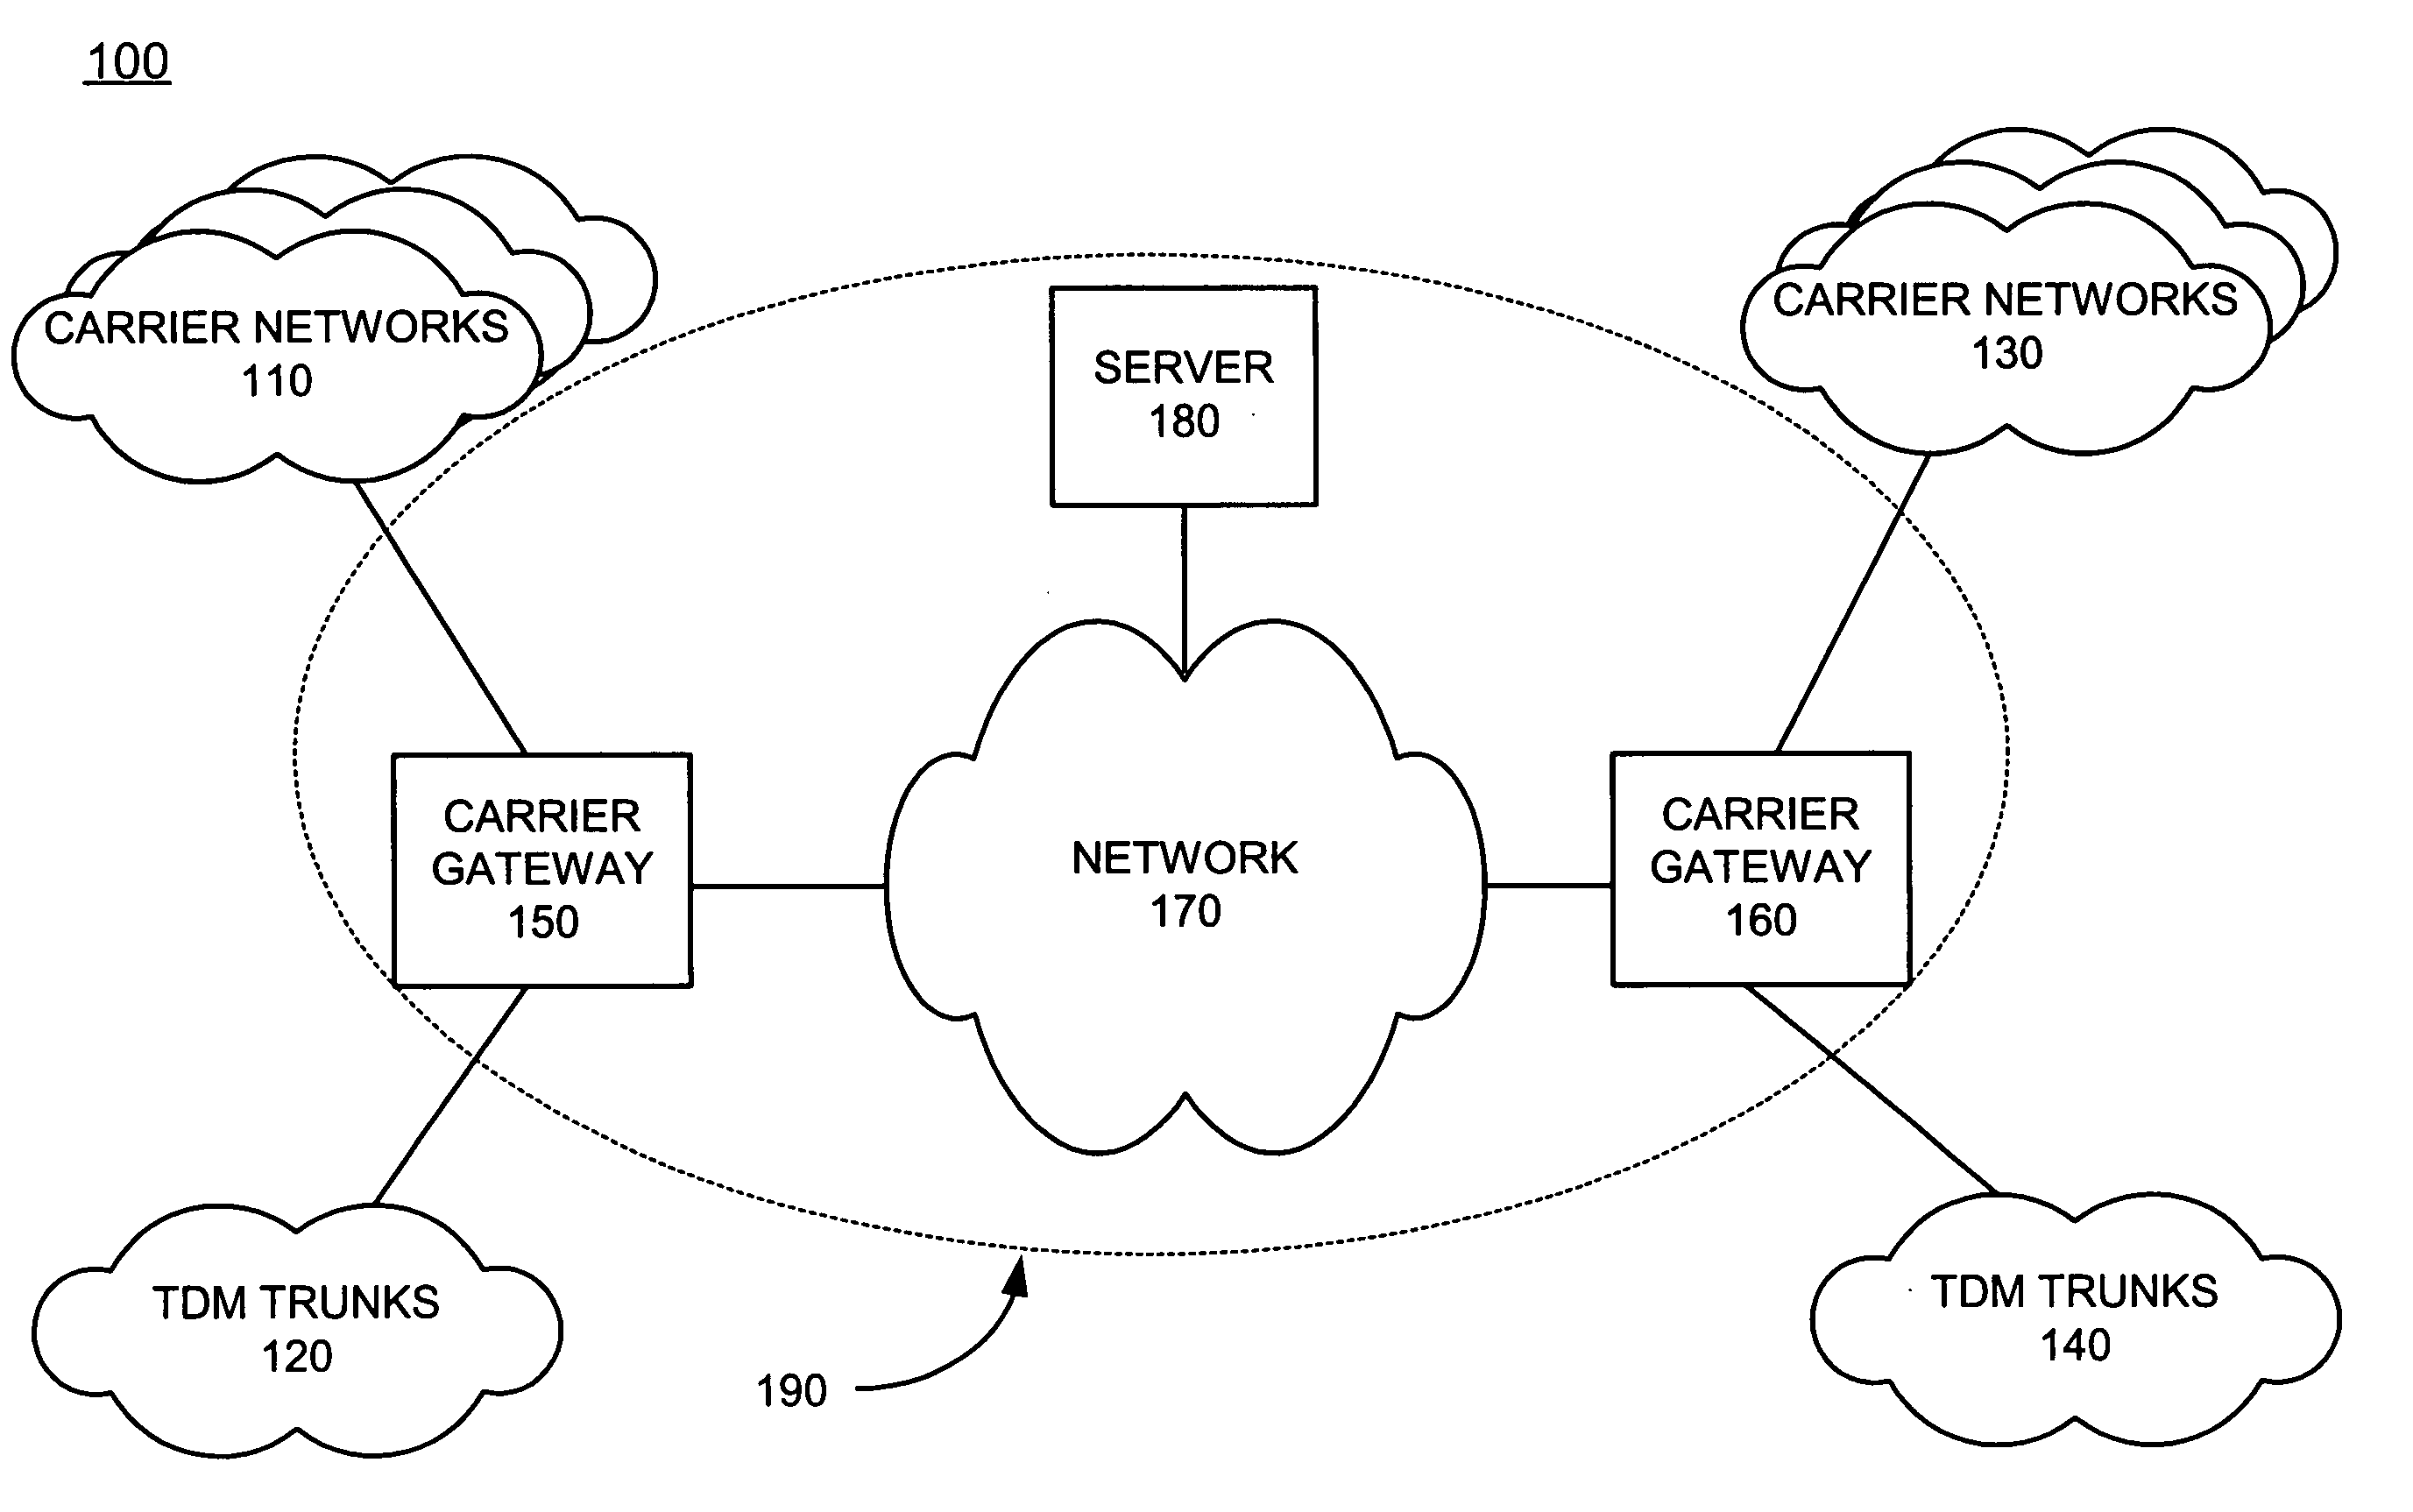 Routing traffic between carriers